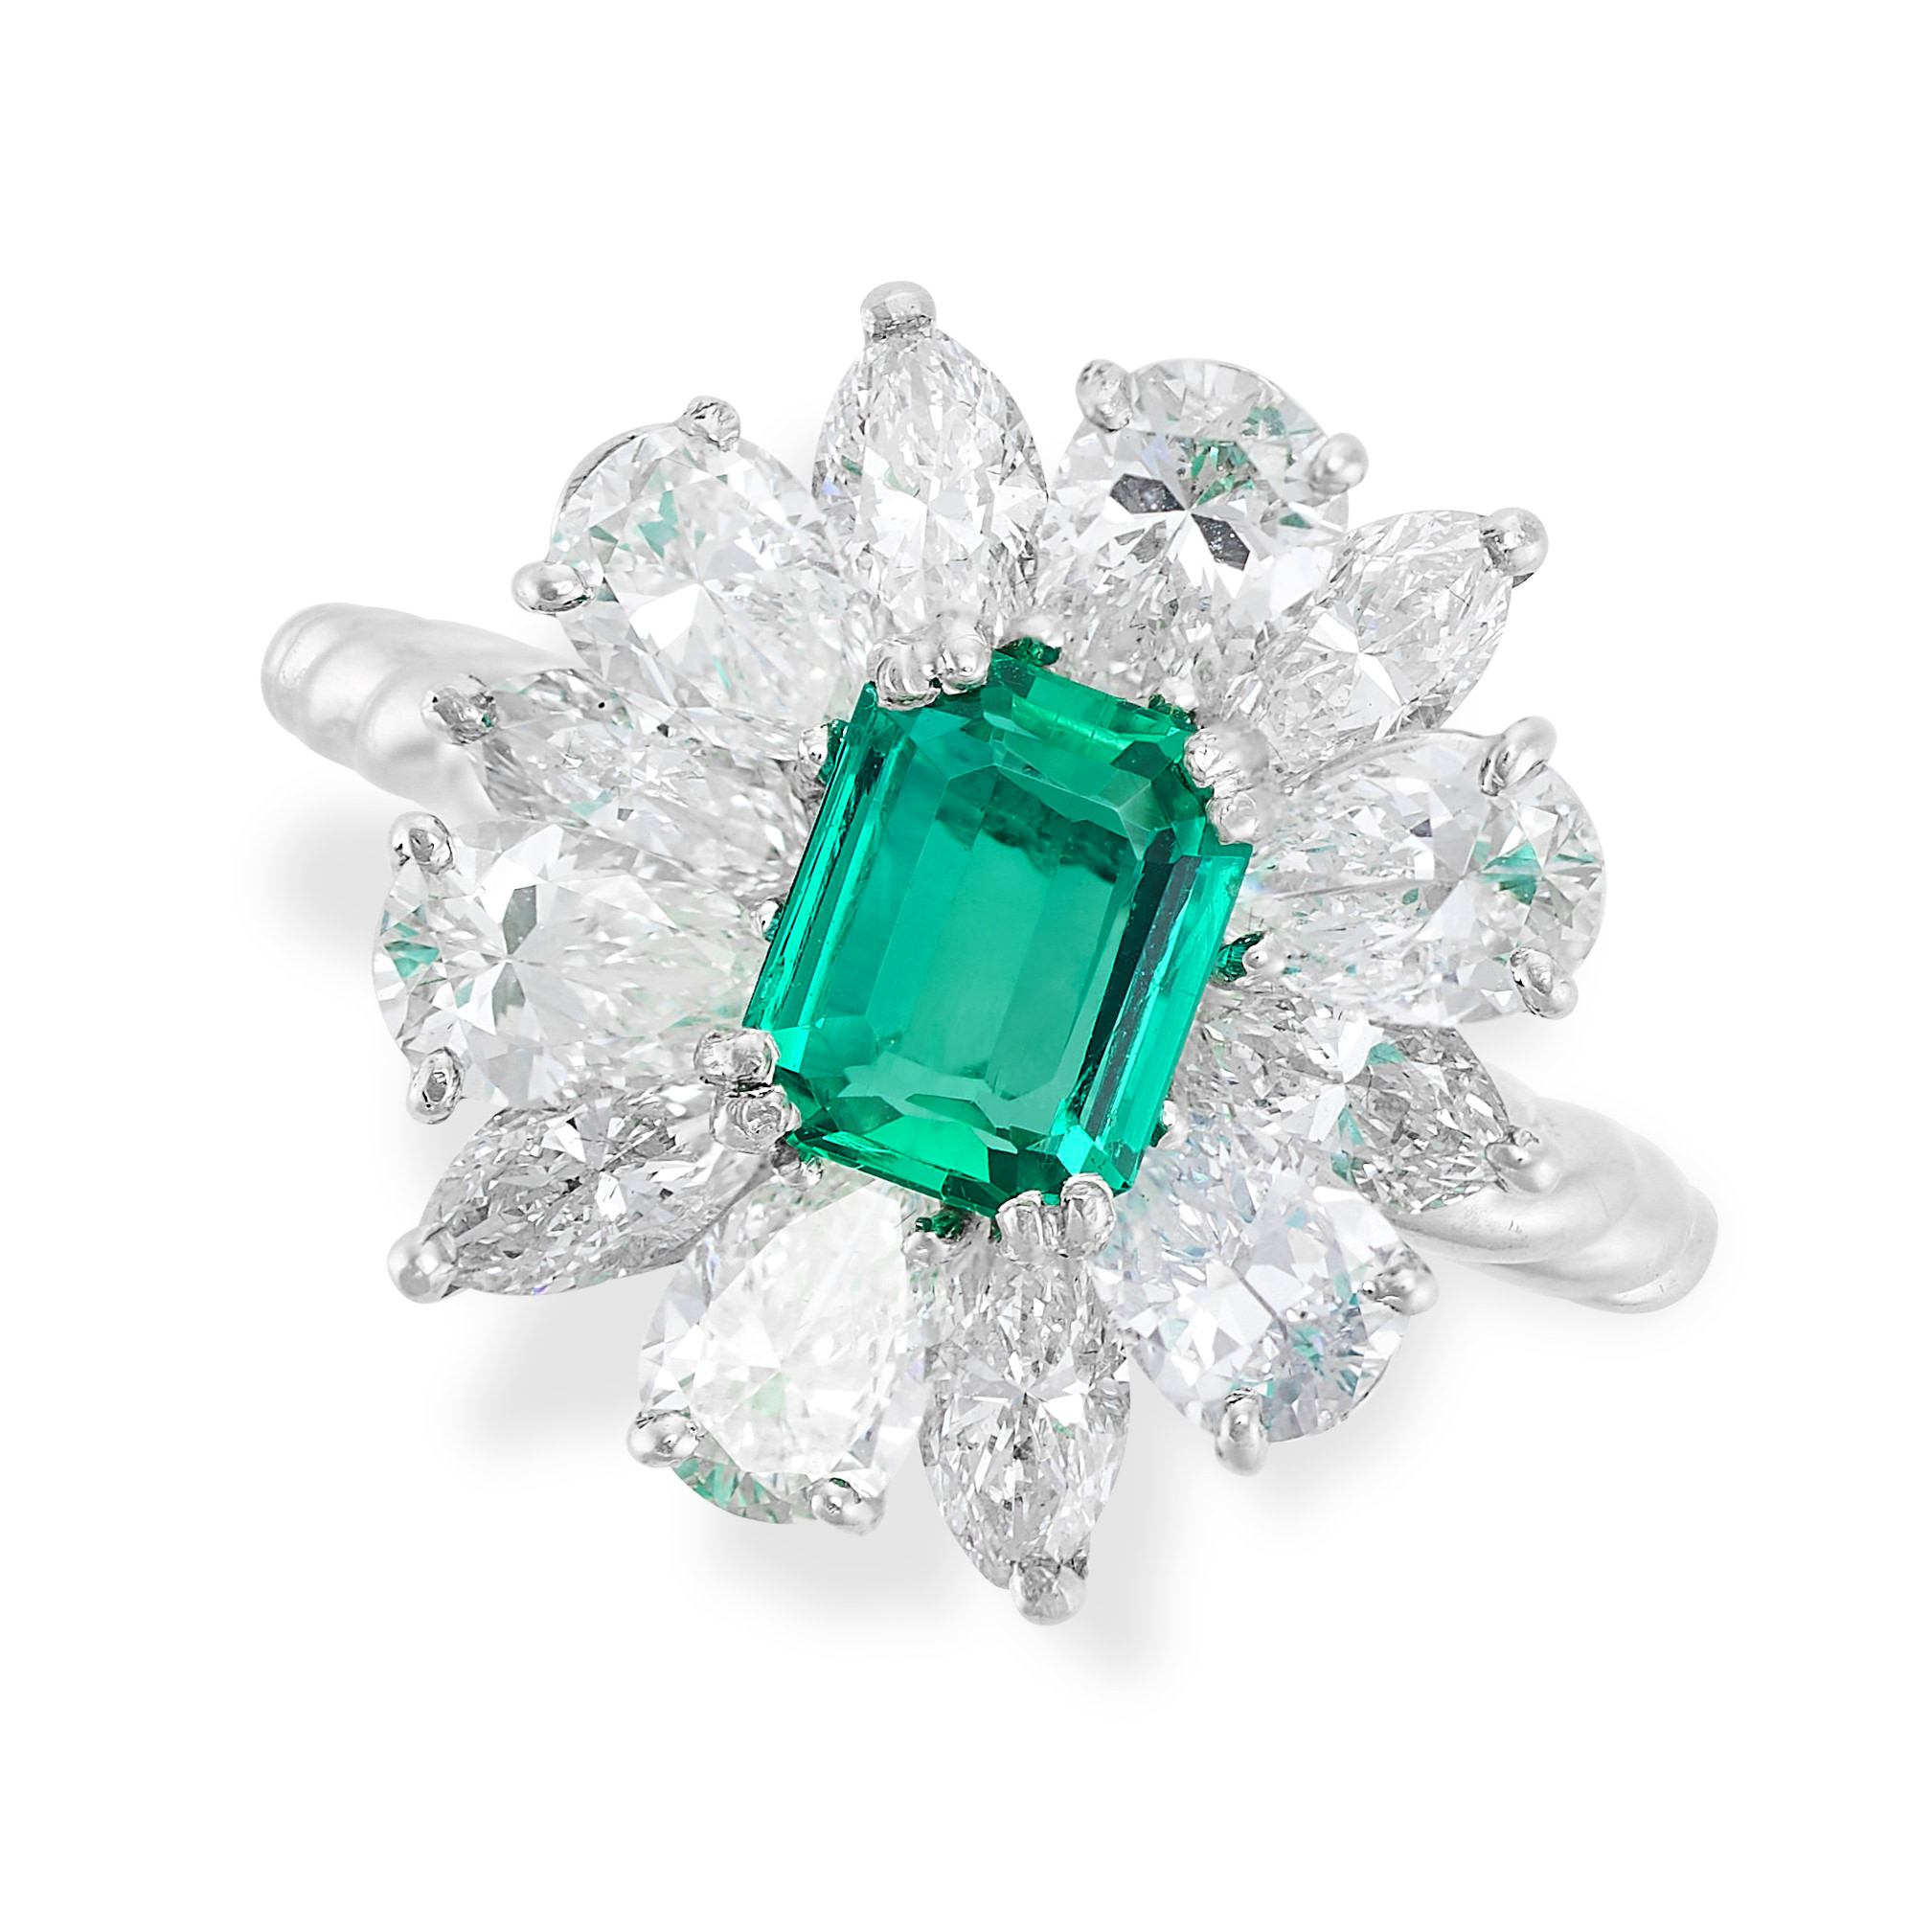 RENE KERN, A FINE EMERALD AND DIAMOND RING in platinum, set with an emerald cut emerald of 1.01